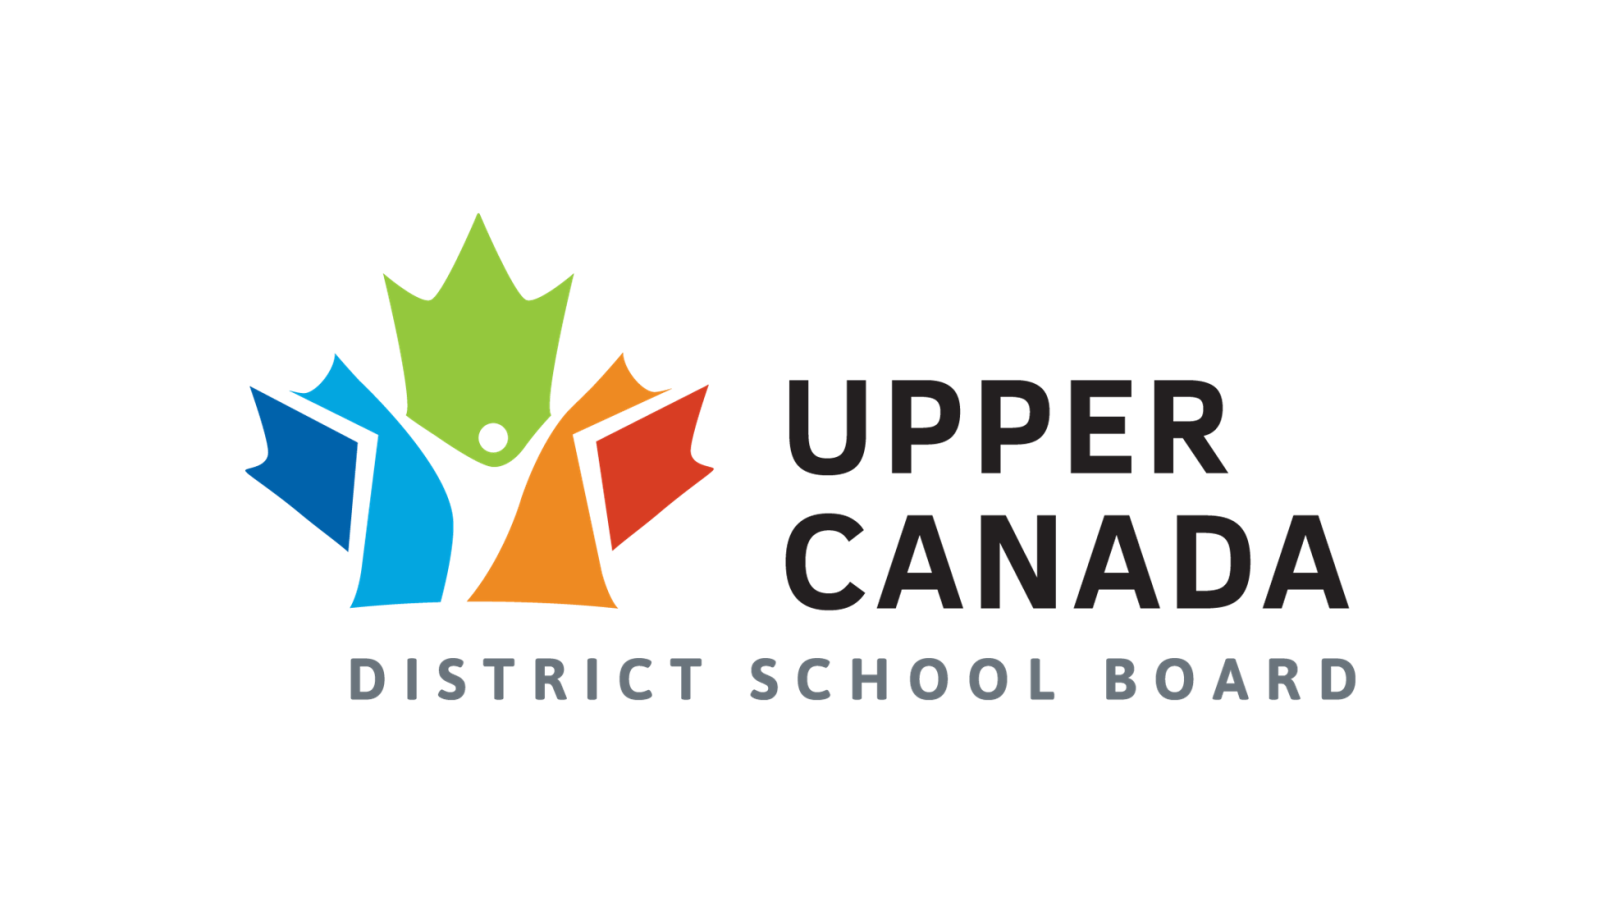 UCDSB Shares New Logo and Black History Month Update